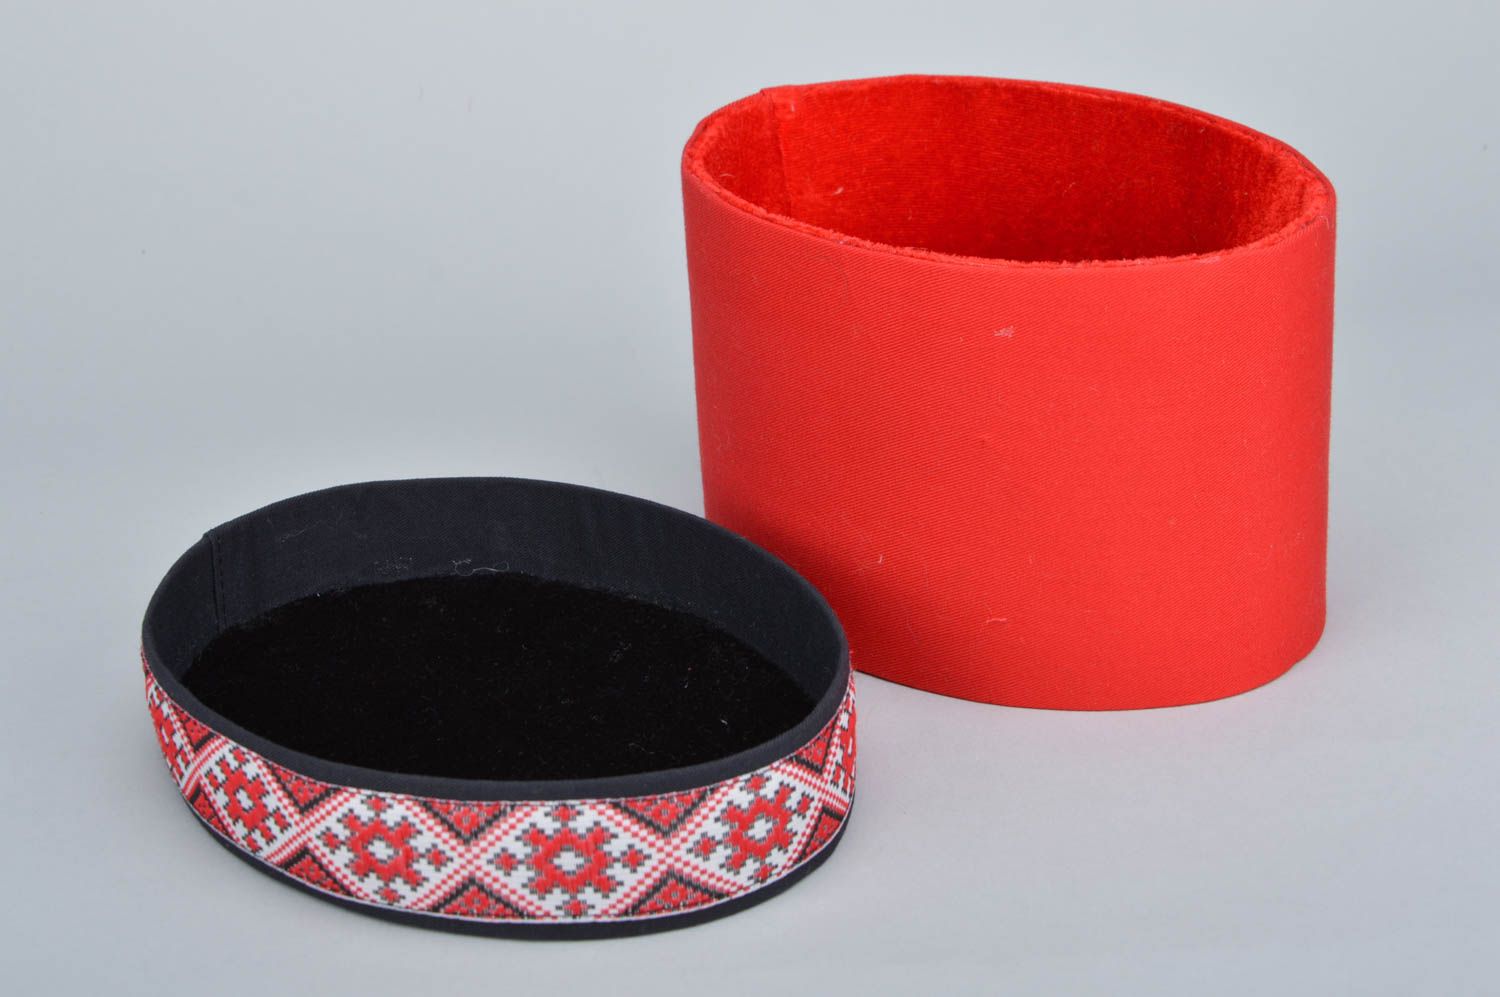 Handmade decorative oval carton box covered with red fabric with ethnic motifs photo 4